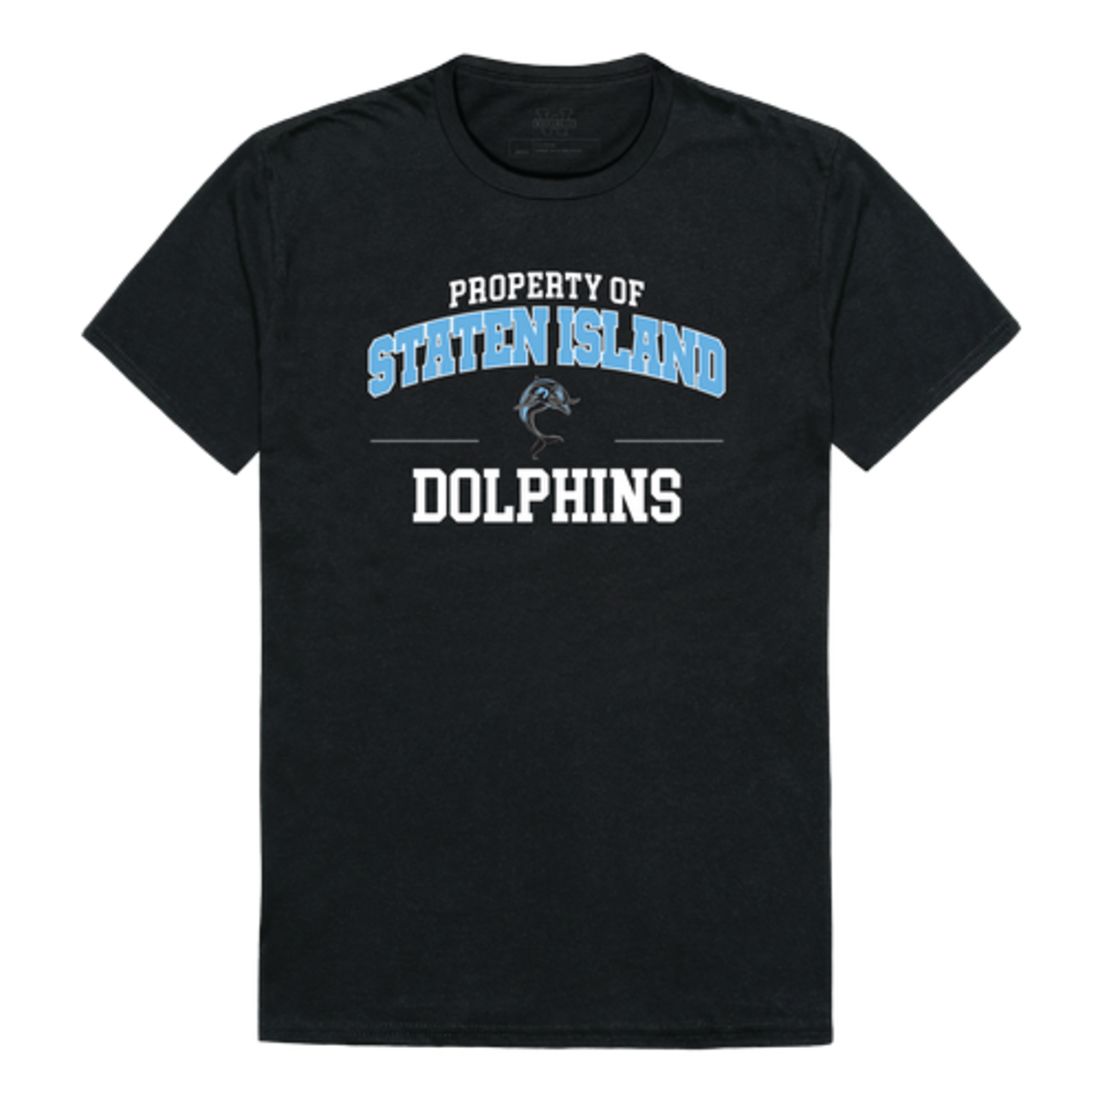 CUNY College of Staten Island Dolphins Property T-Shirt